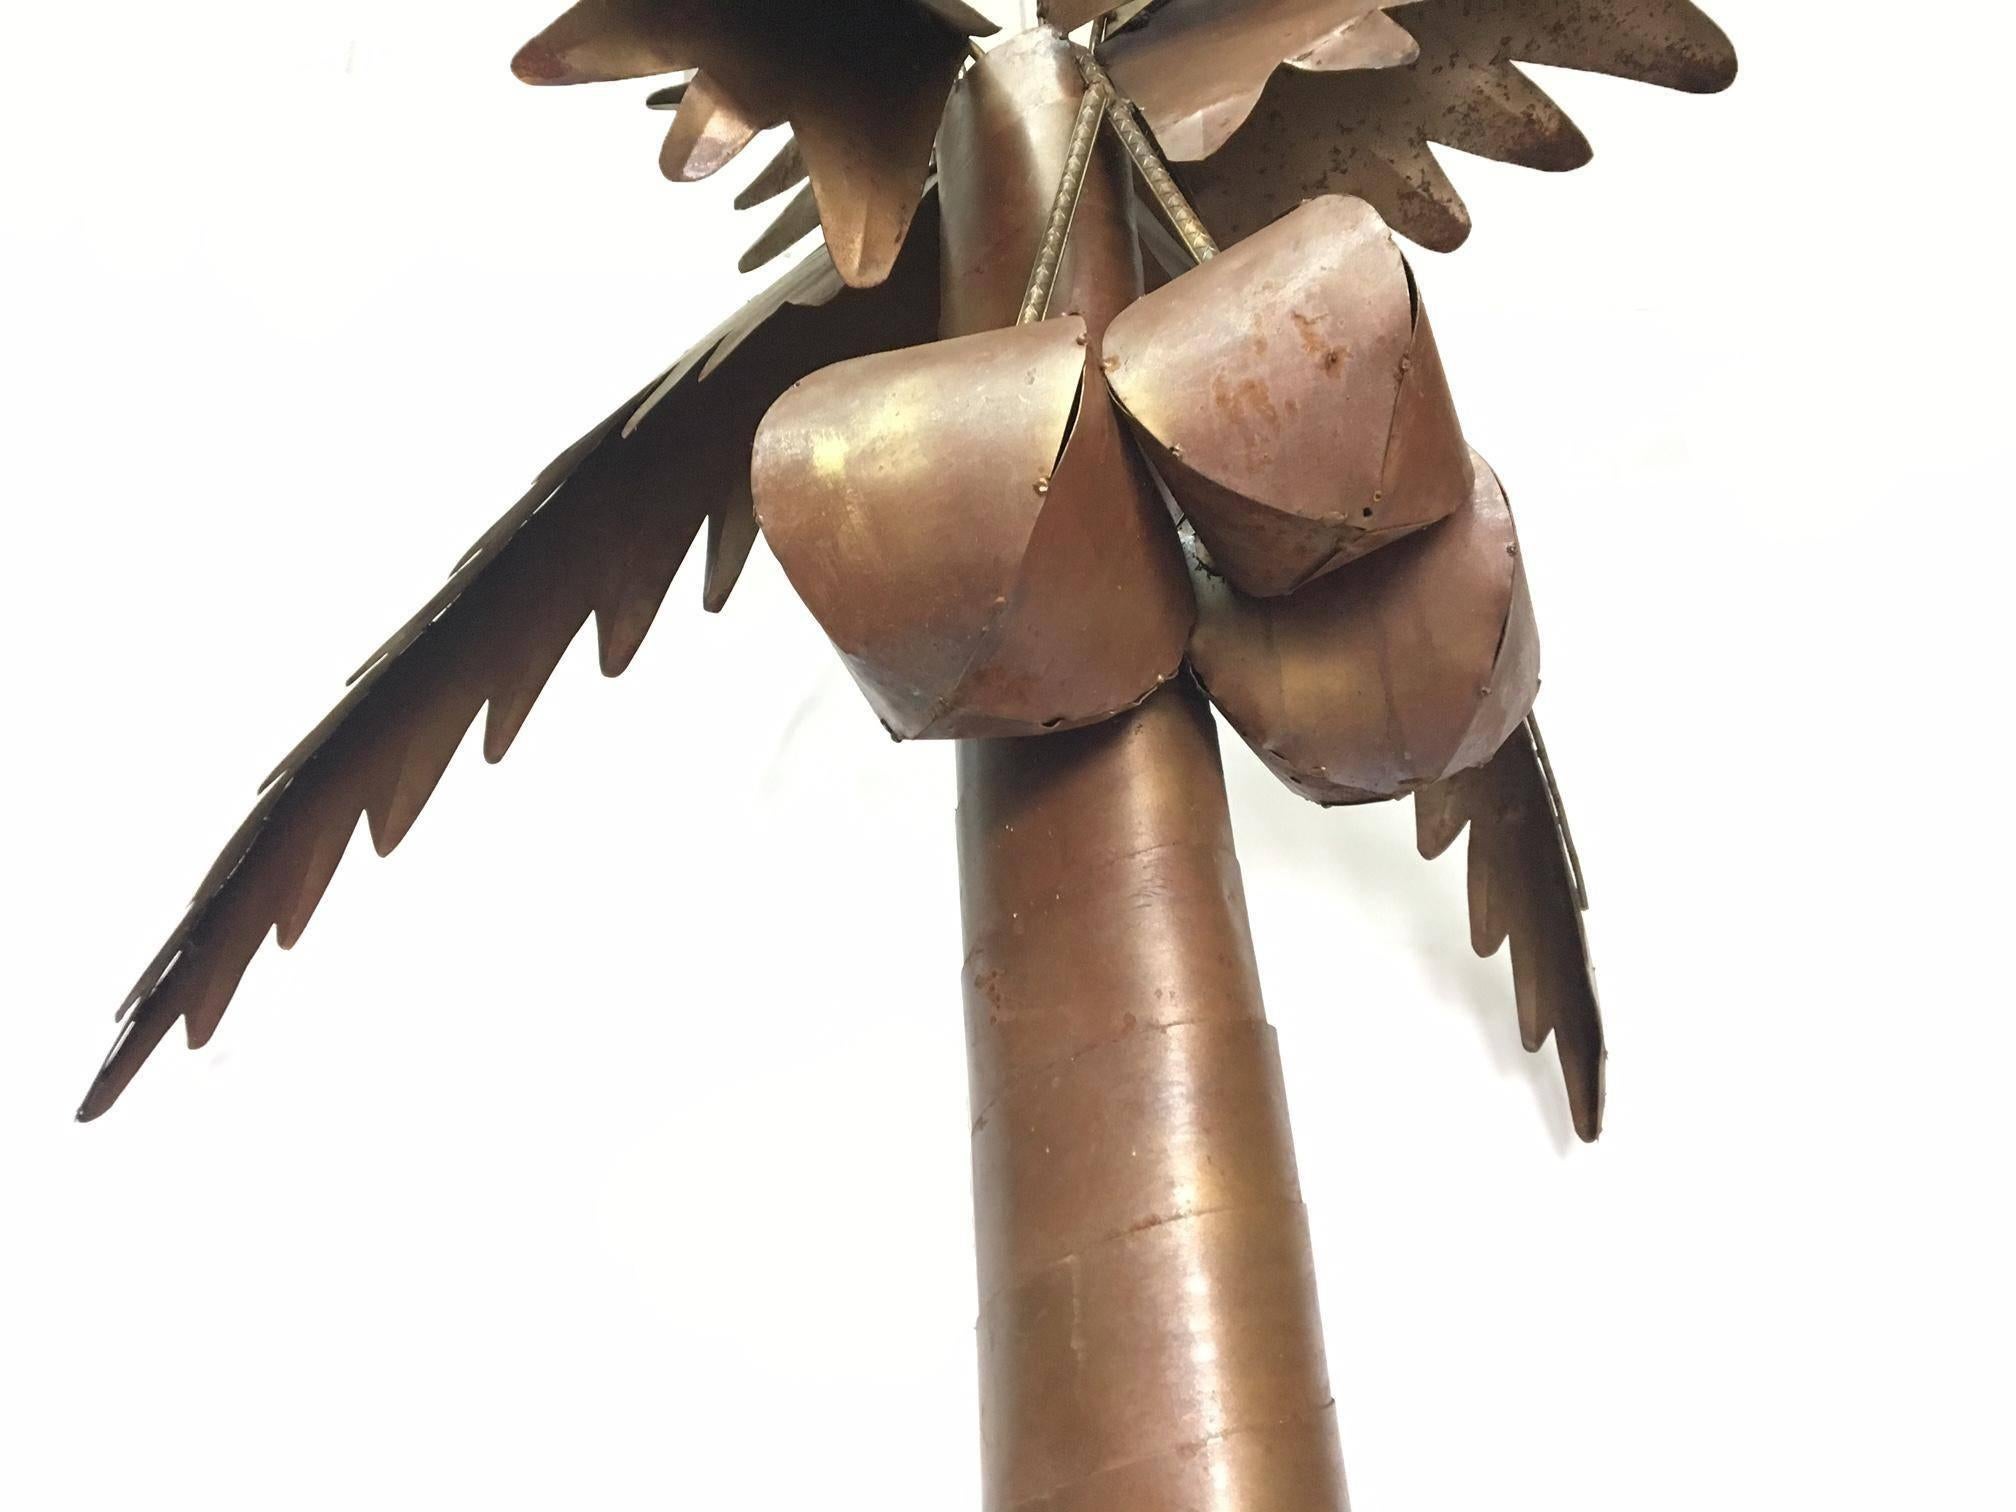 Large steel palm tree sculpture stands over 8 feet tall. Frawns can be detached for easier moving. Finish is burnt gold and brown, with some natural oxidation and patina. Thin sheet steel with steel rebar inner frame. Could be used indoors or out.